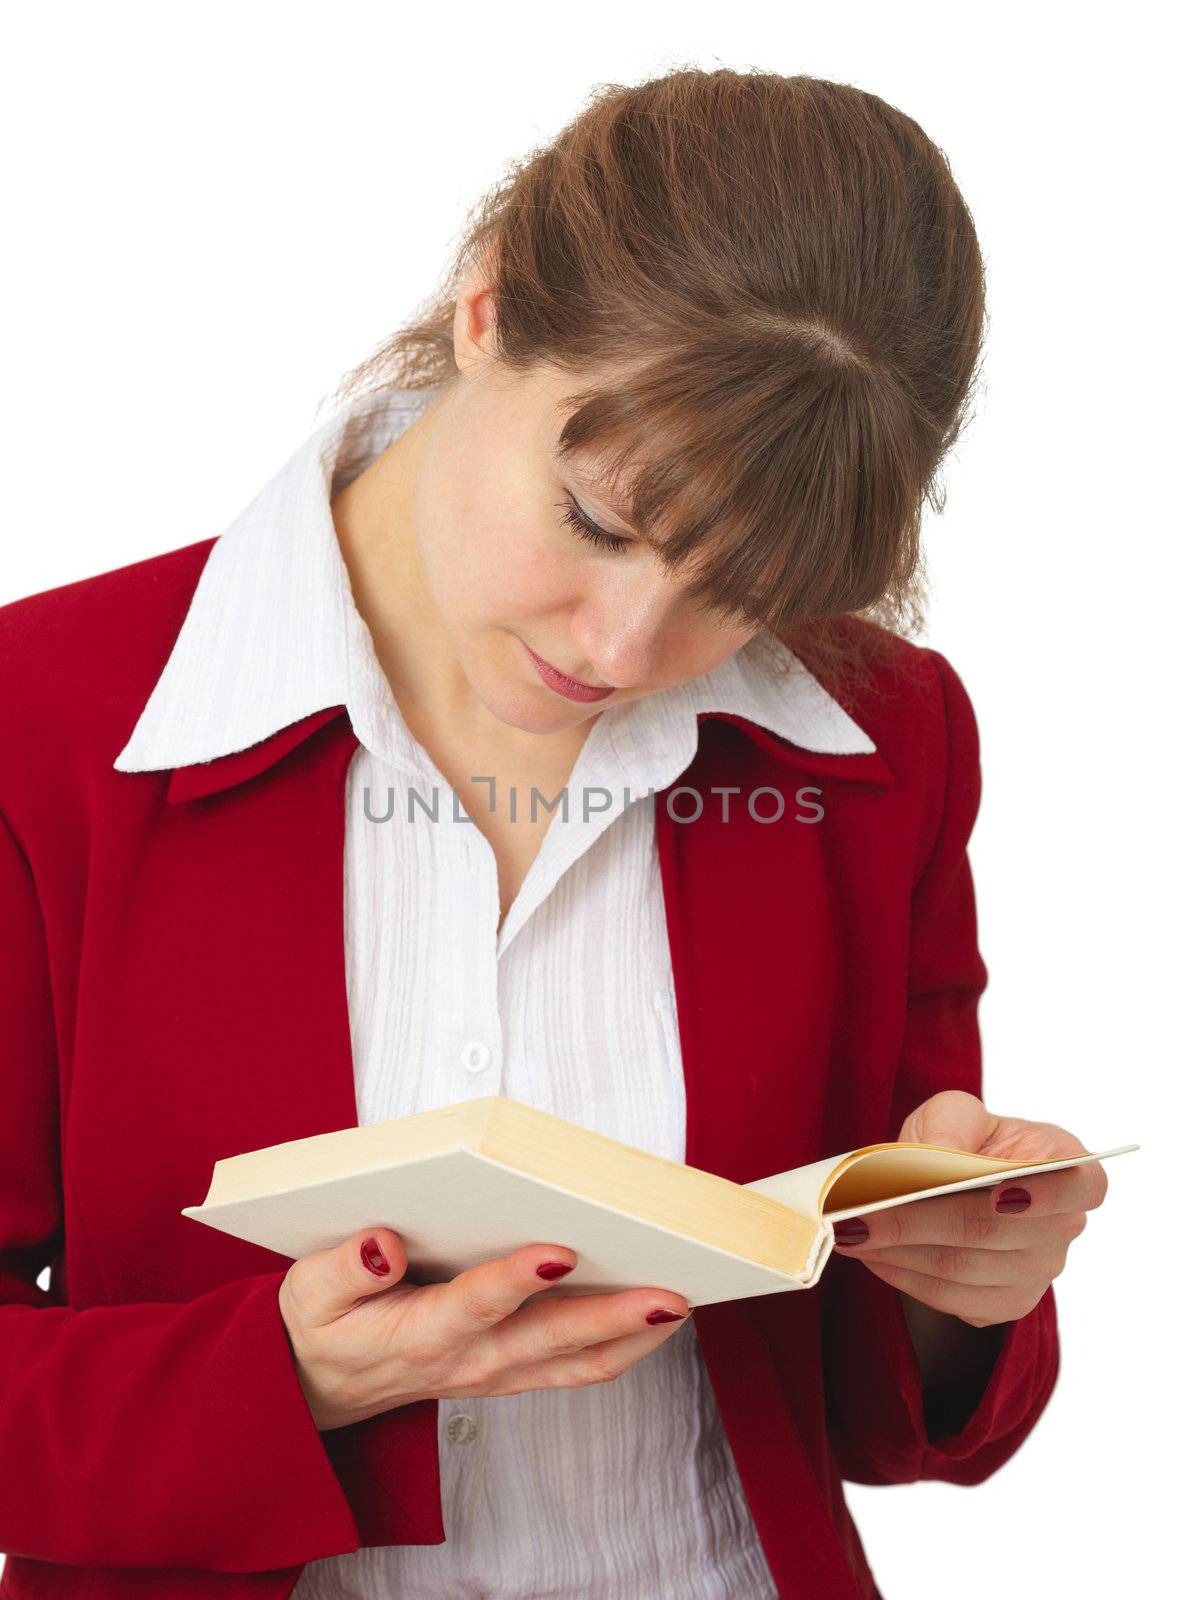 A woman acquainted with the contents of the book